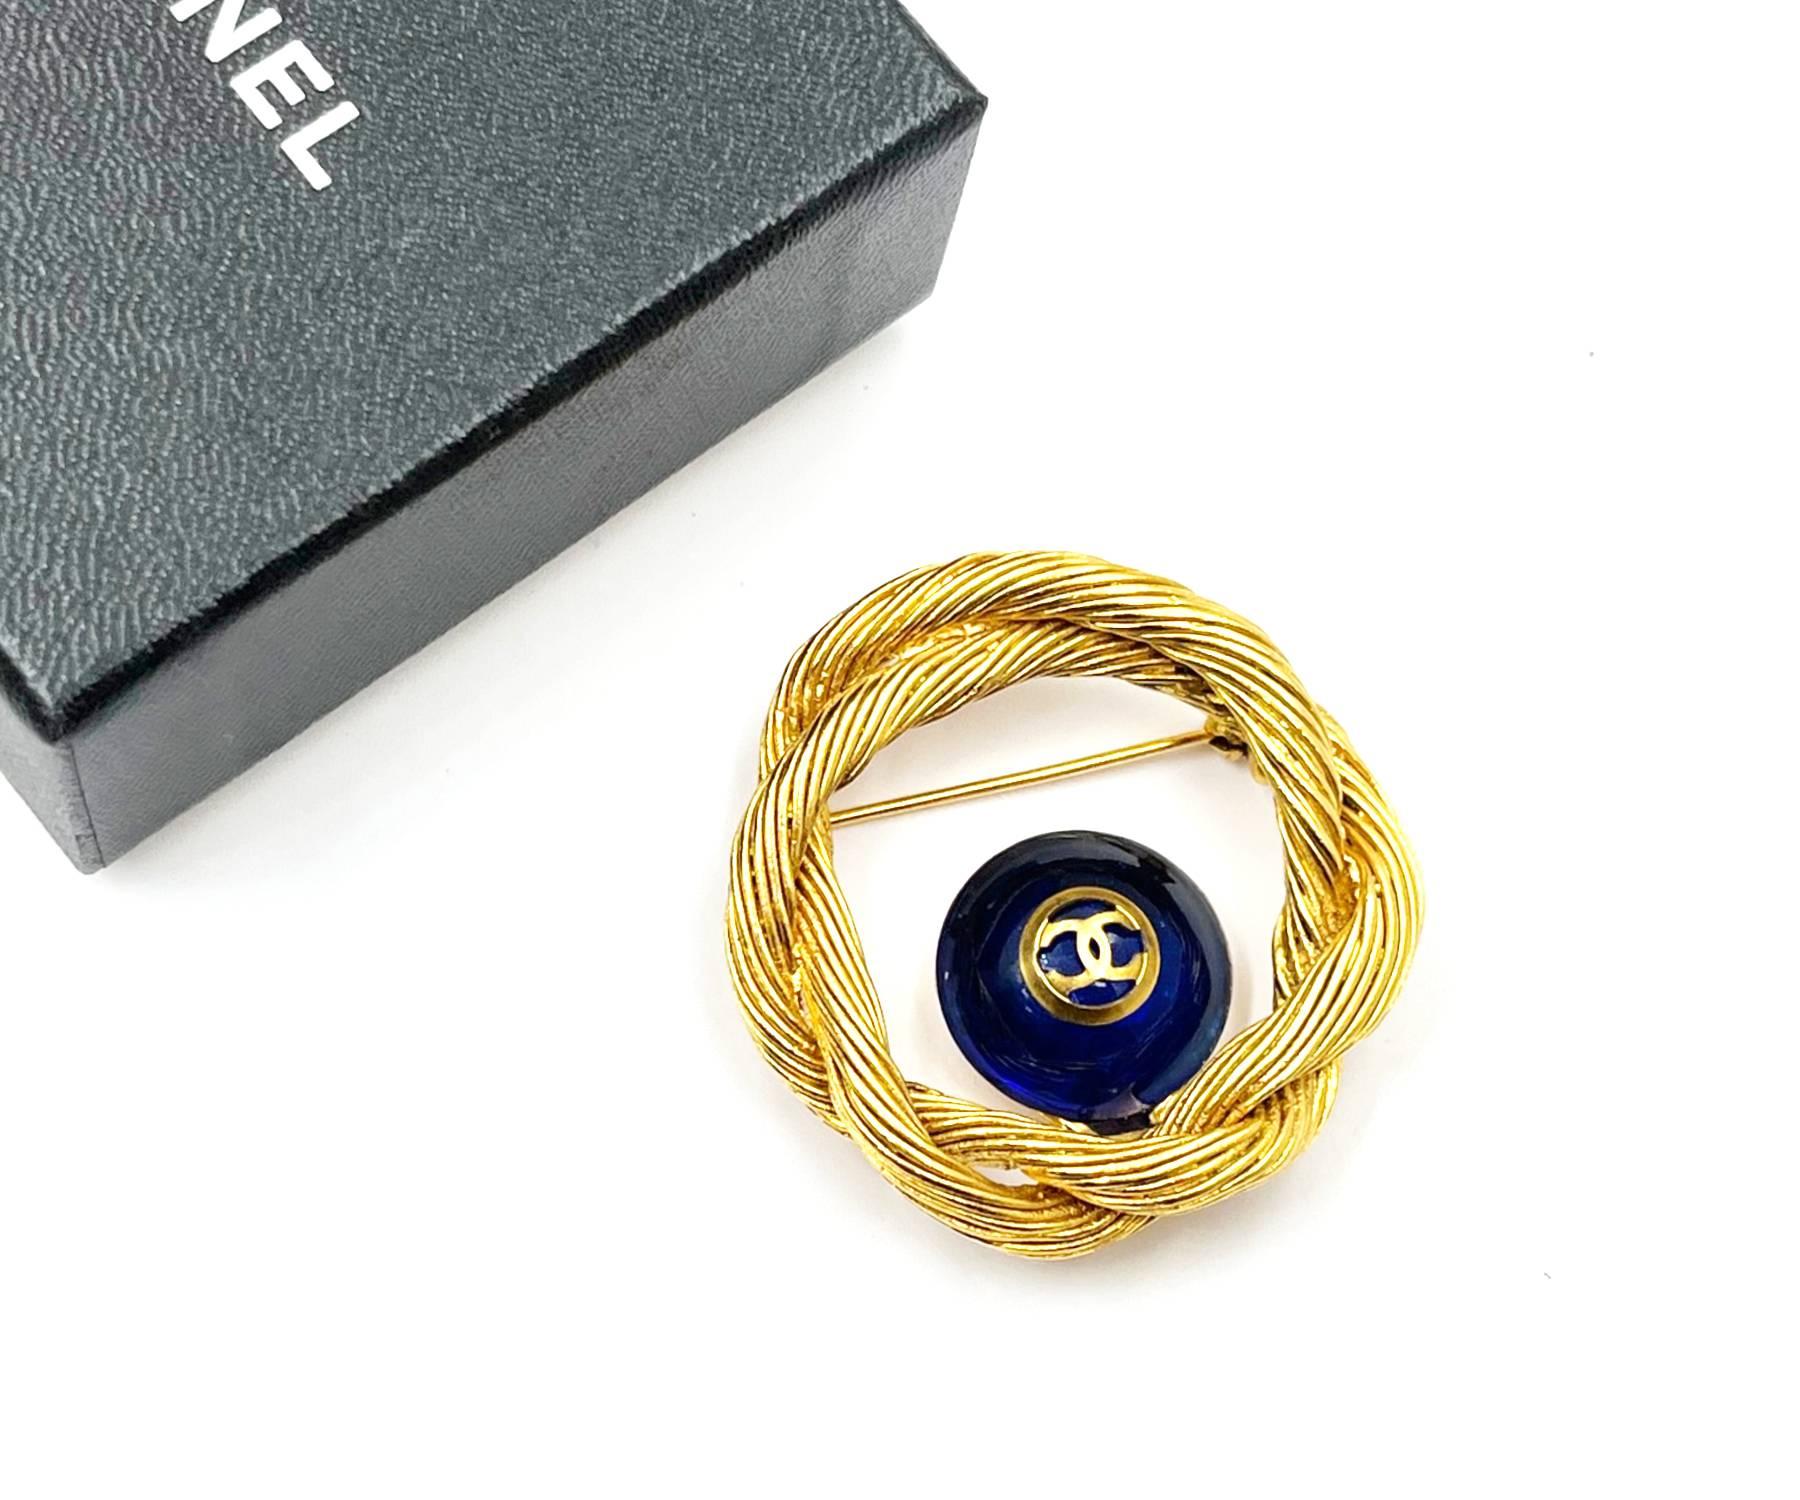 Chanel Vintage Gold Plated CC Blue Stone Rope Wreath Brooch

*Marked 94
*Made in France
*Comes with the original box

– It is approximately 1.75″ x 1.75″.
-Very classic and rare
-In a pristine condition

AB3904-00417

